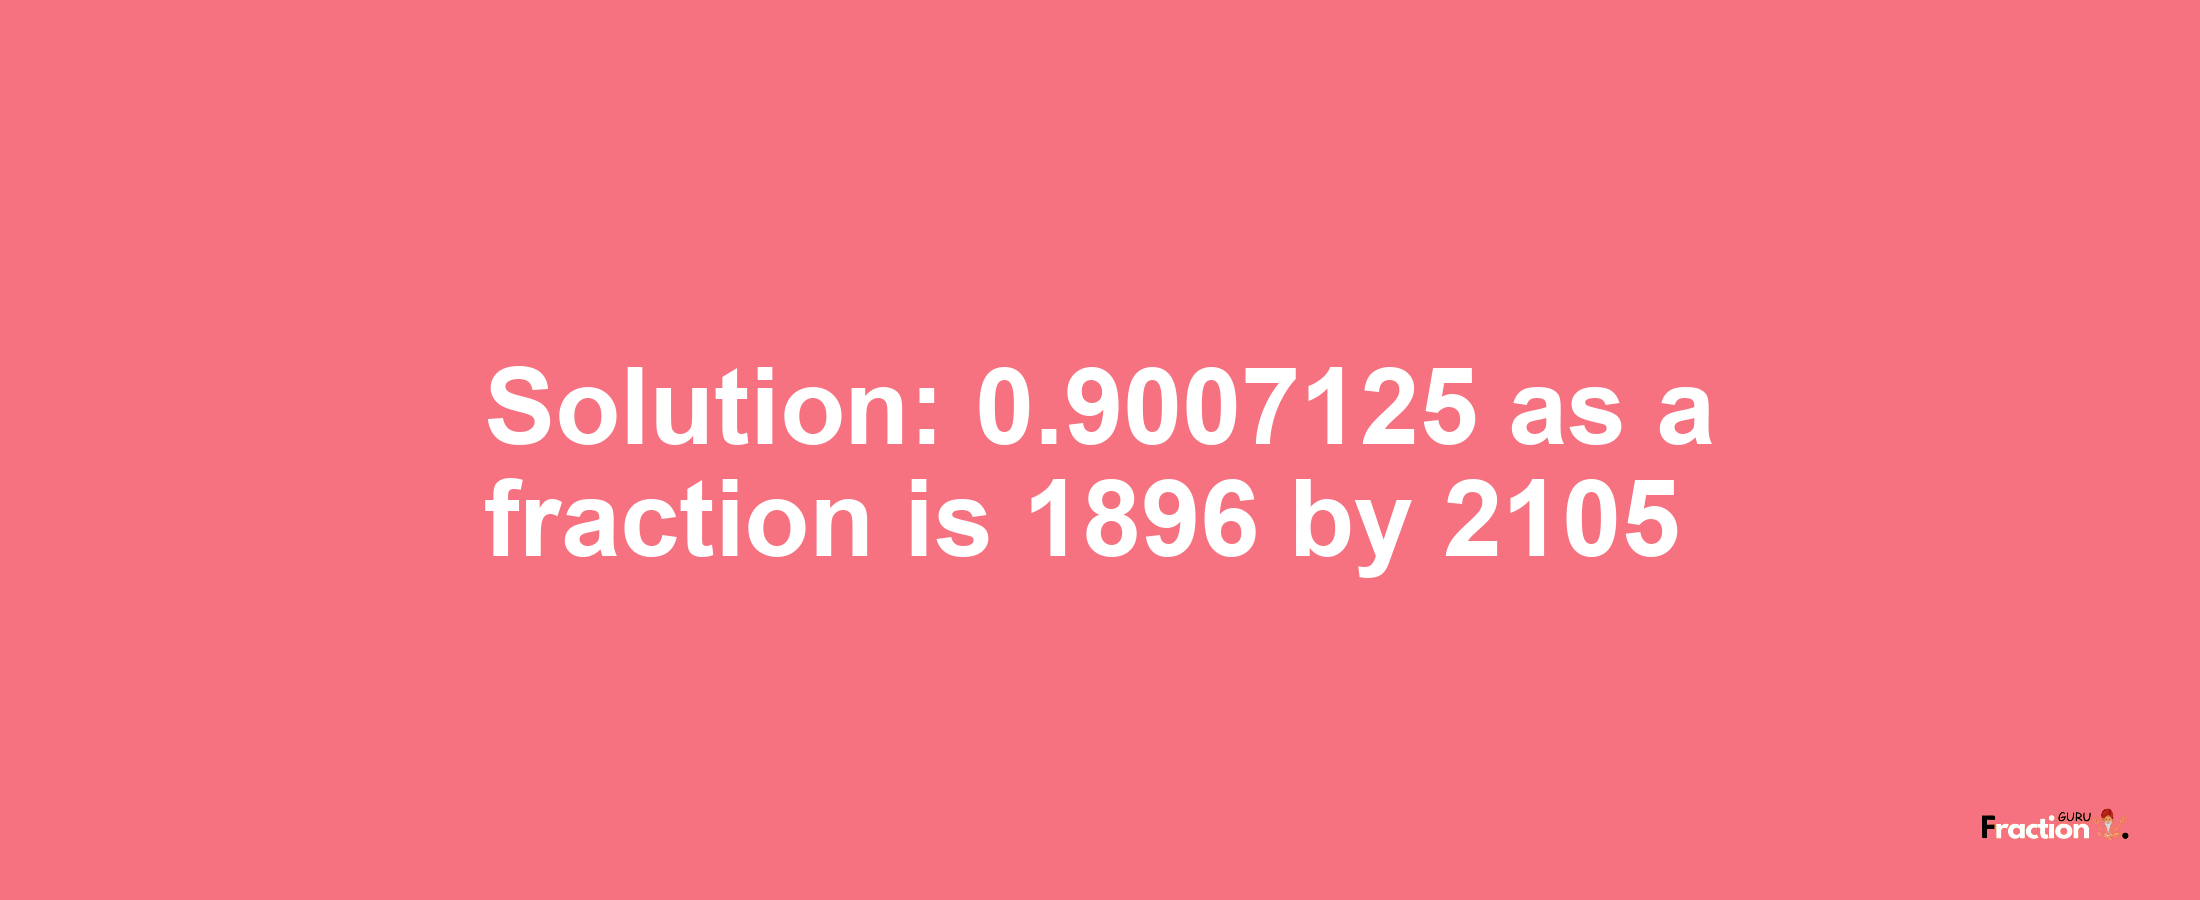 Solution:0.9007125 as a fraction is 1896/2105